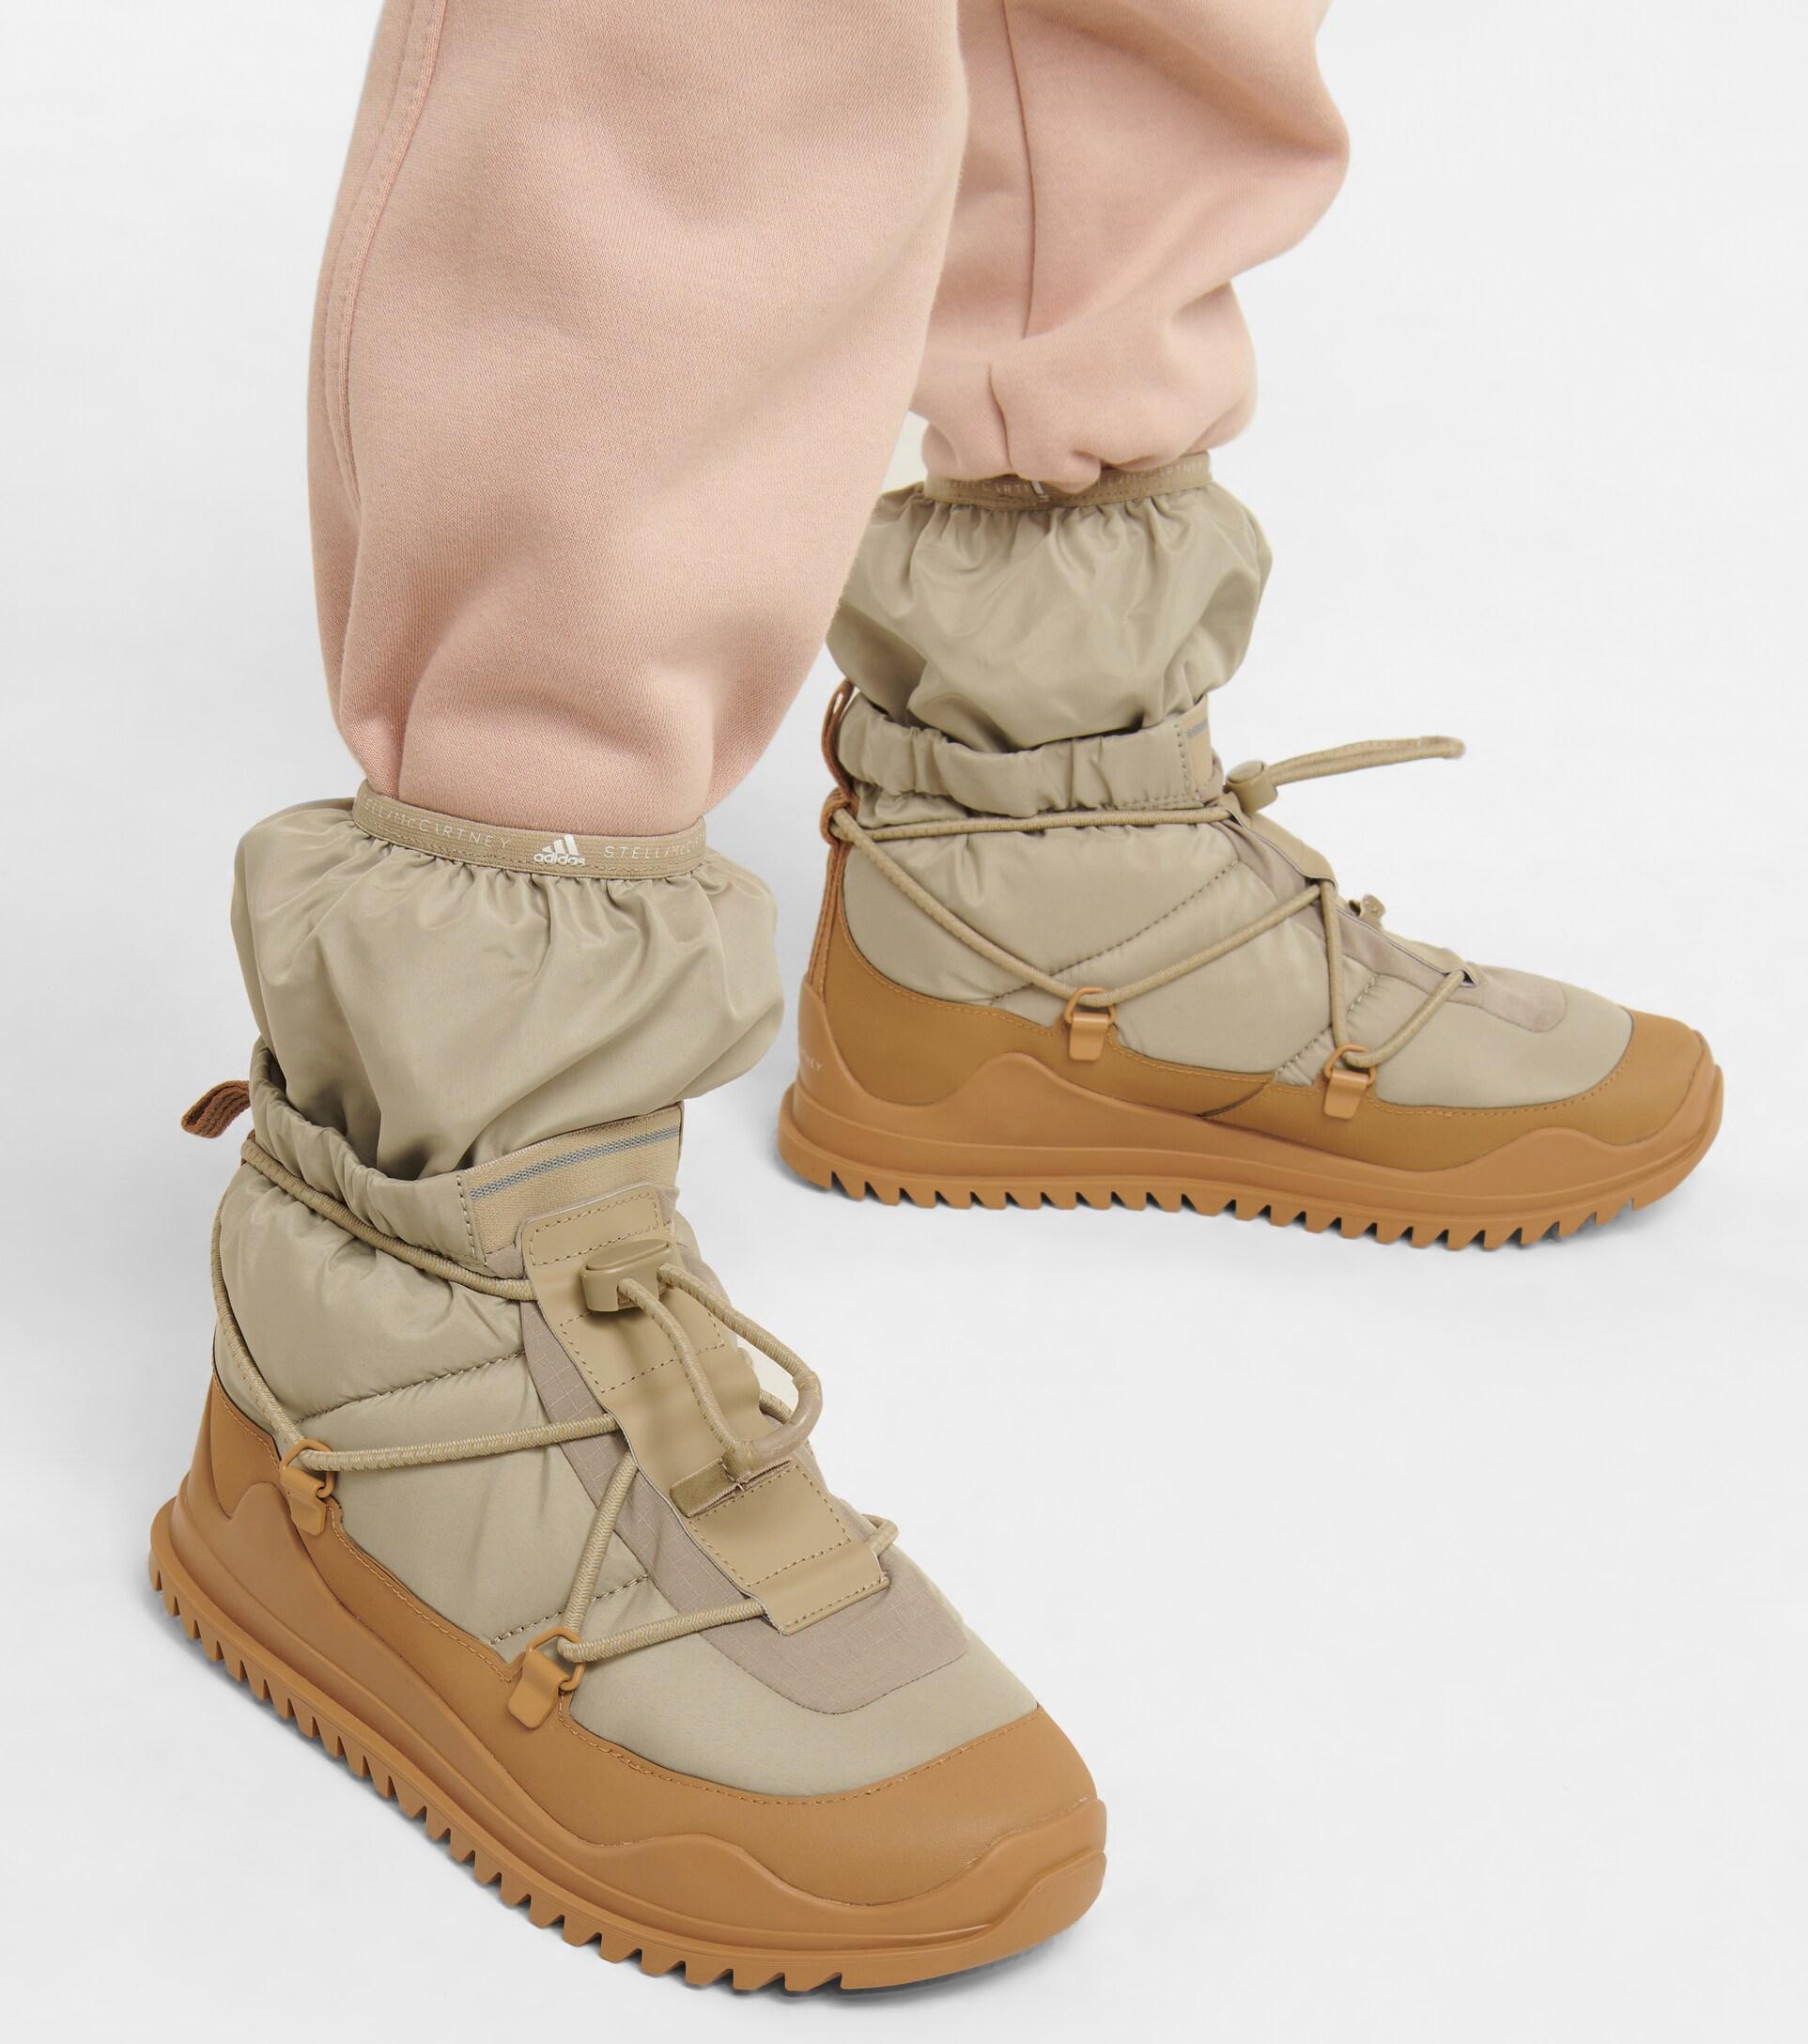 adidas By Stella McCartney Winter Snow Boots in Natural | Lyst